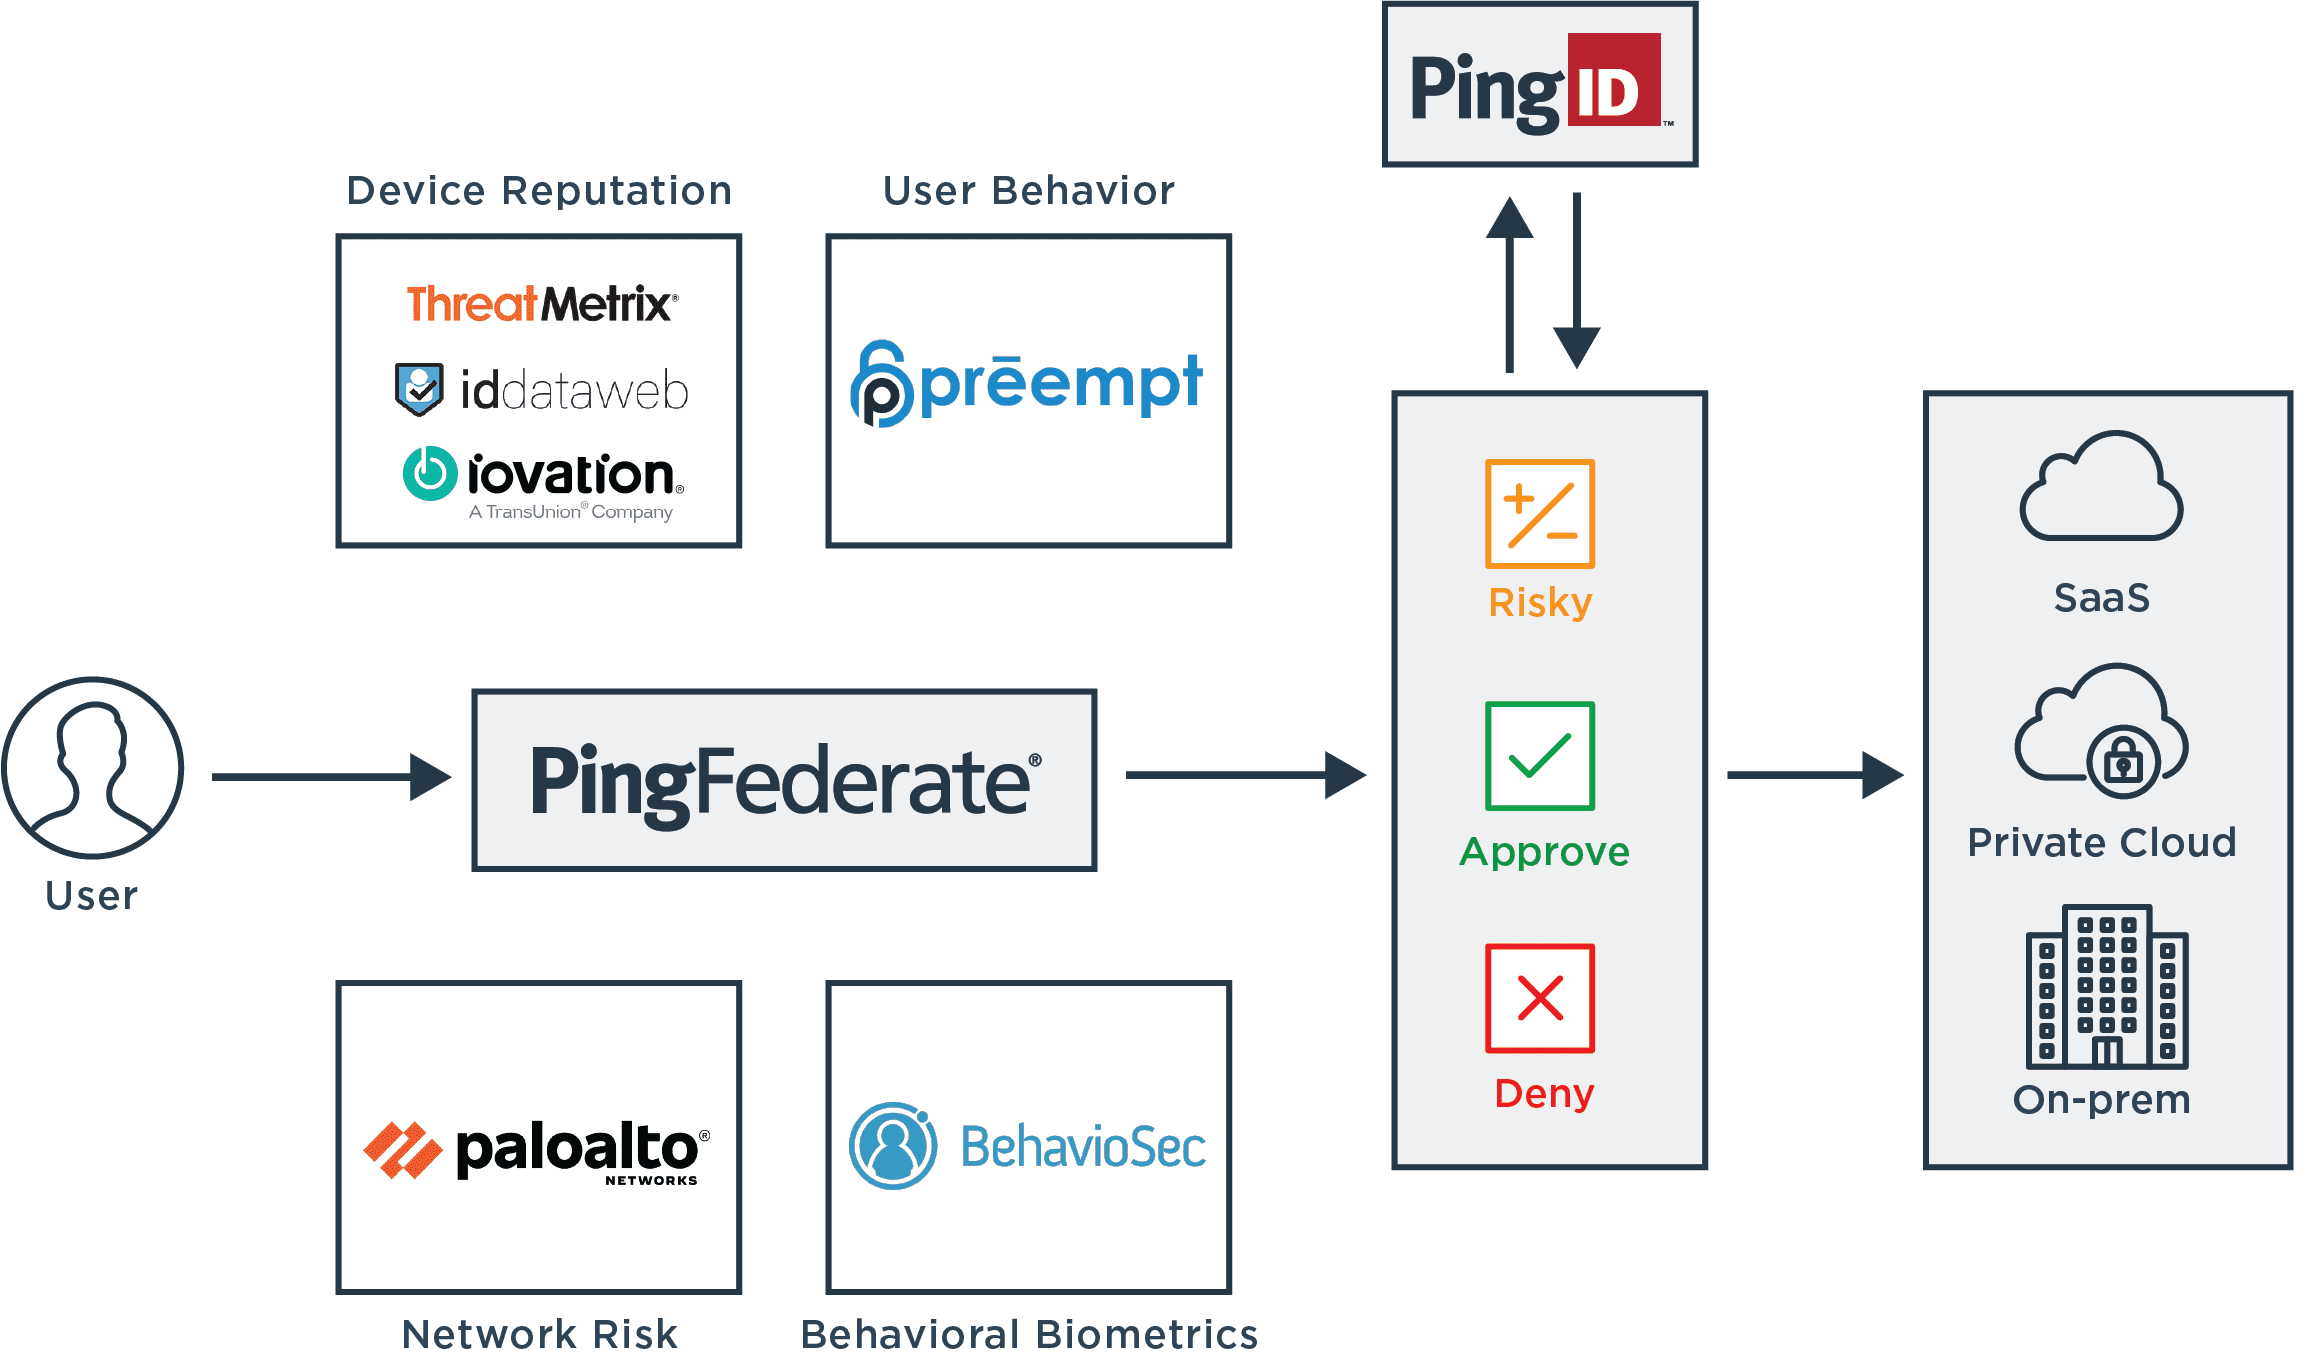 Diagram illustrating how Ping partners with other solutions providers to determine if a user should be approved, required to step up authentication or denied request.